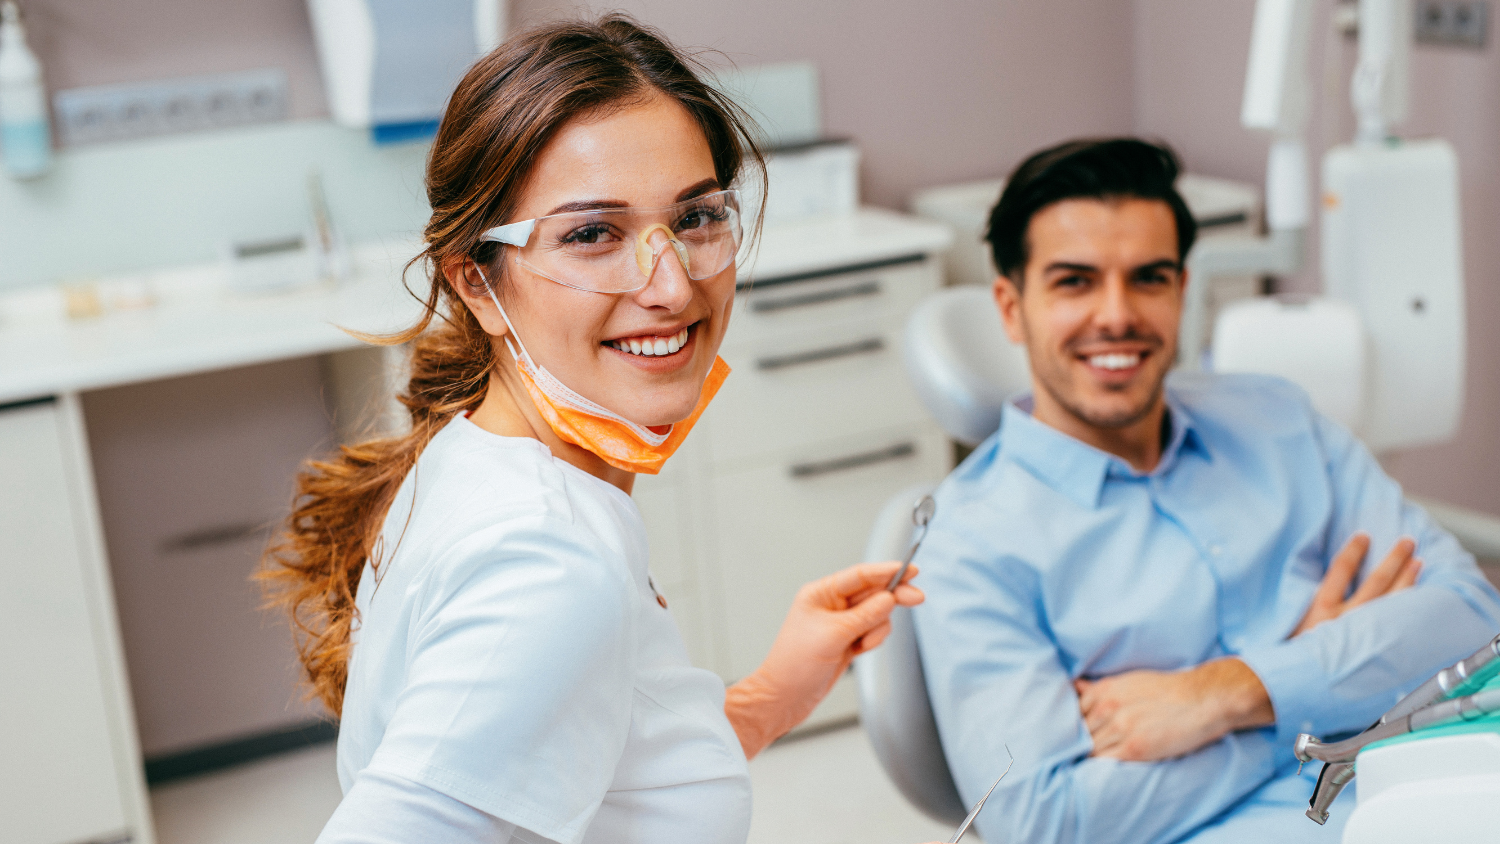 Dentist smiling in front of patient